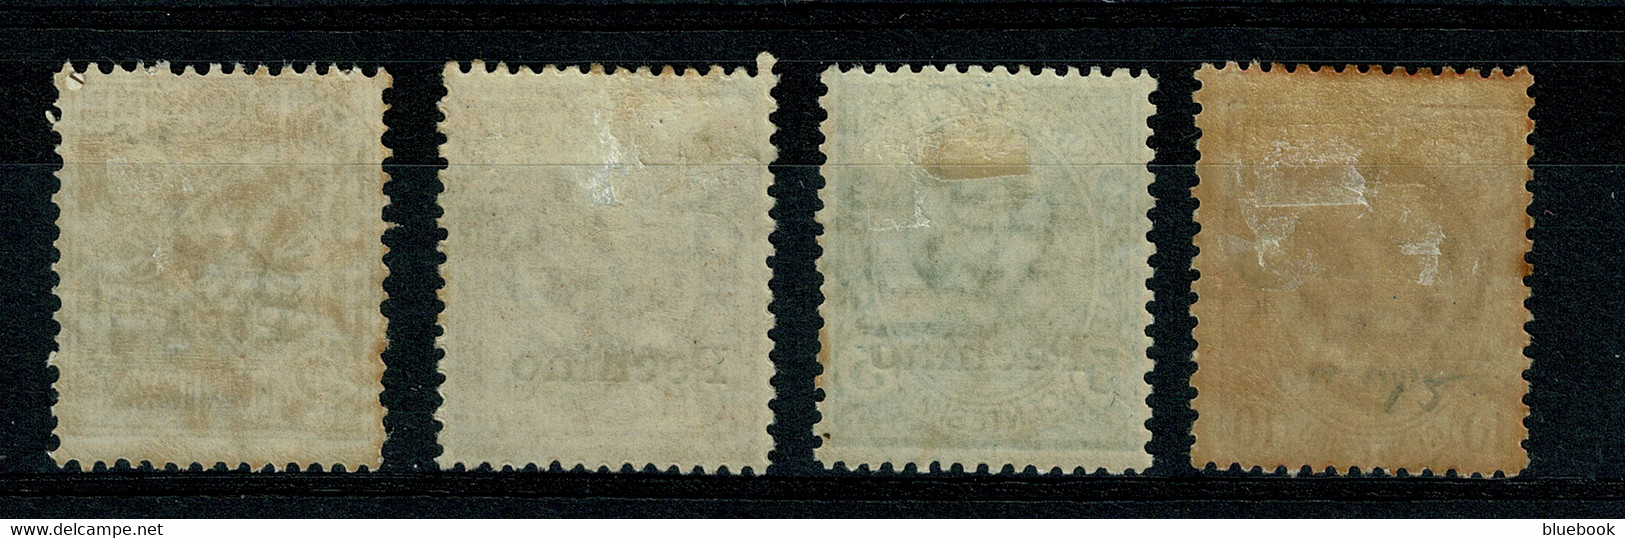 Ref 1542 -  Italy Post Offices - Pechino China 1917 - 1918  1c - 10c Mint Stamps. Sass. 8-11 Cat €188 - Pékin